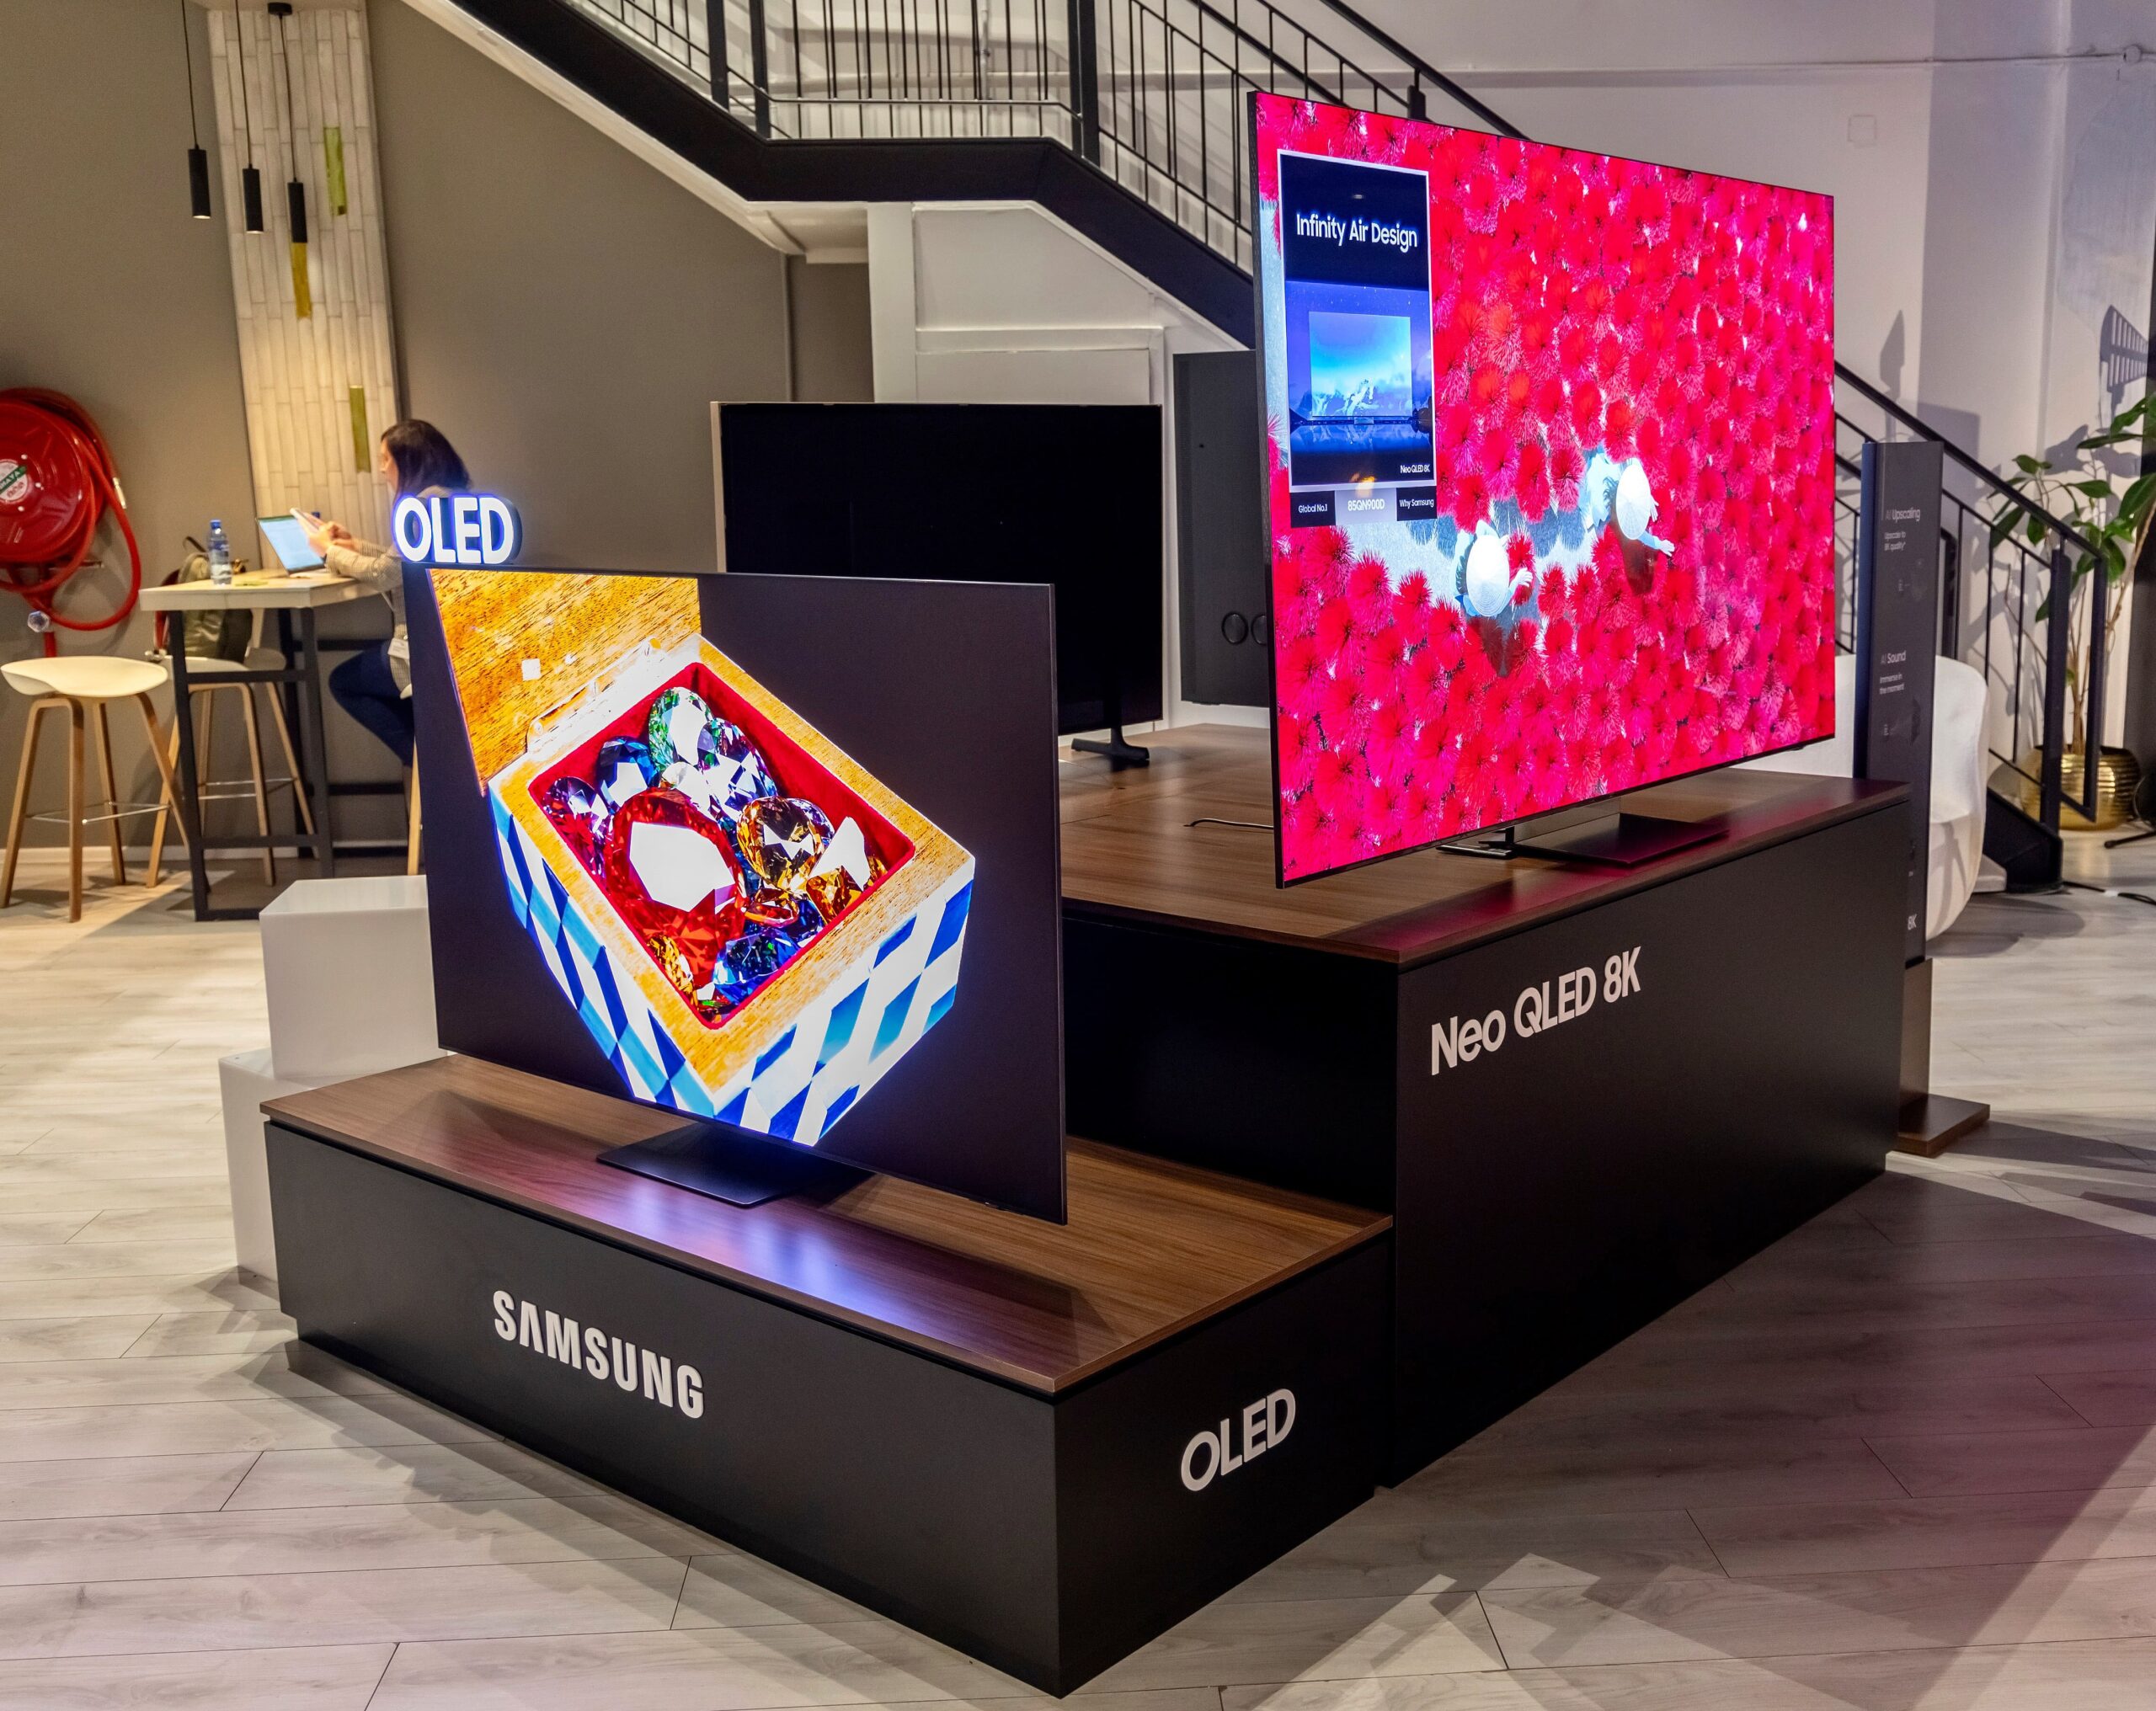 Samsung South Africa unveiled its 2024 TV and sound device line-up at the local Unbox & Discover event which took place at Samsung Experience Store, Design Quarter, Johannesburg, showcasing the latest Neo QLED 8K and 4K, OLED TVs and sound devices.